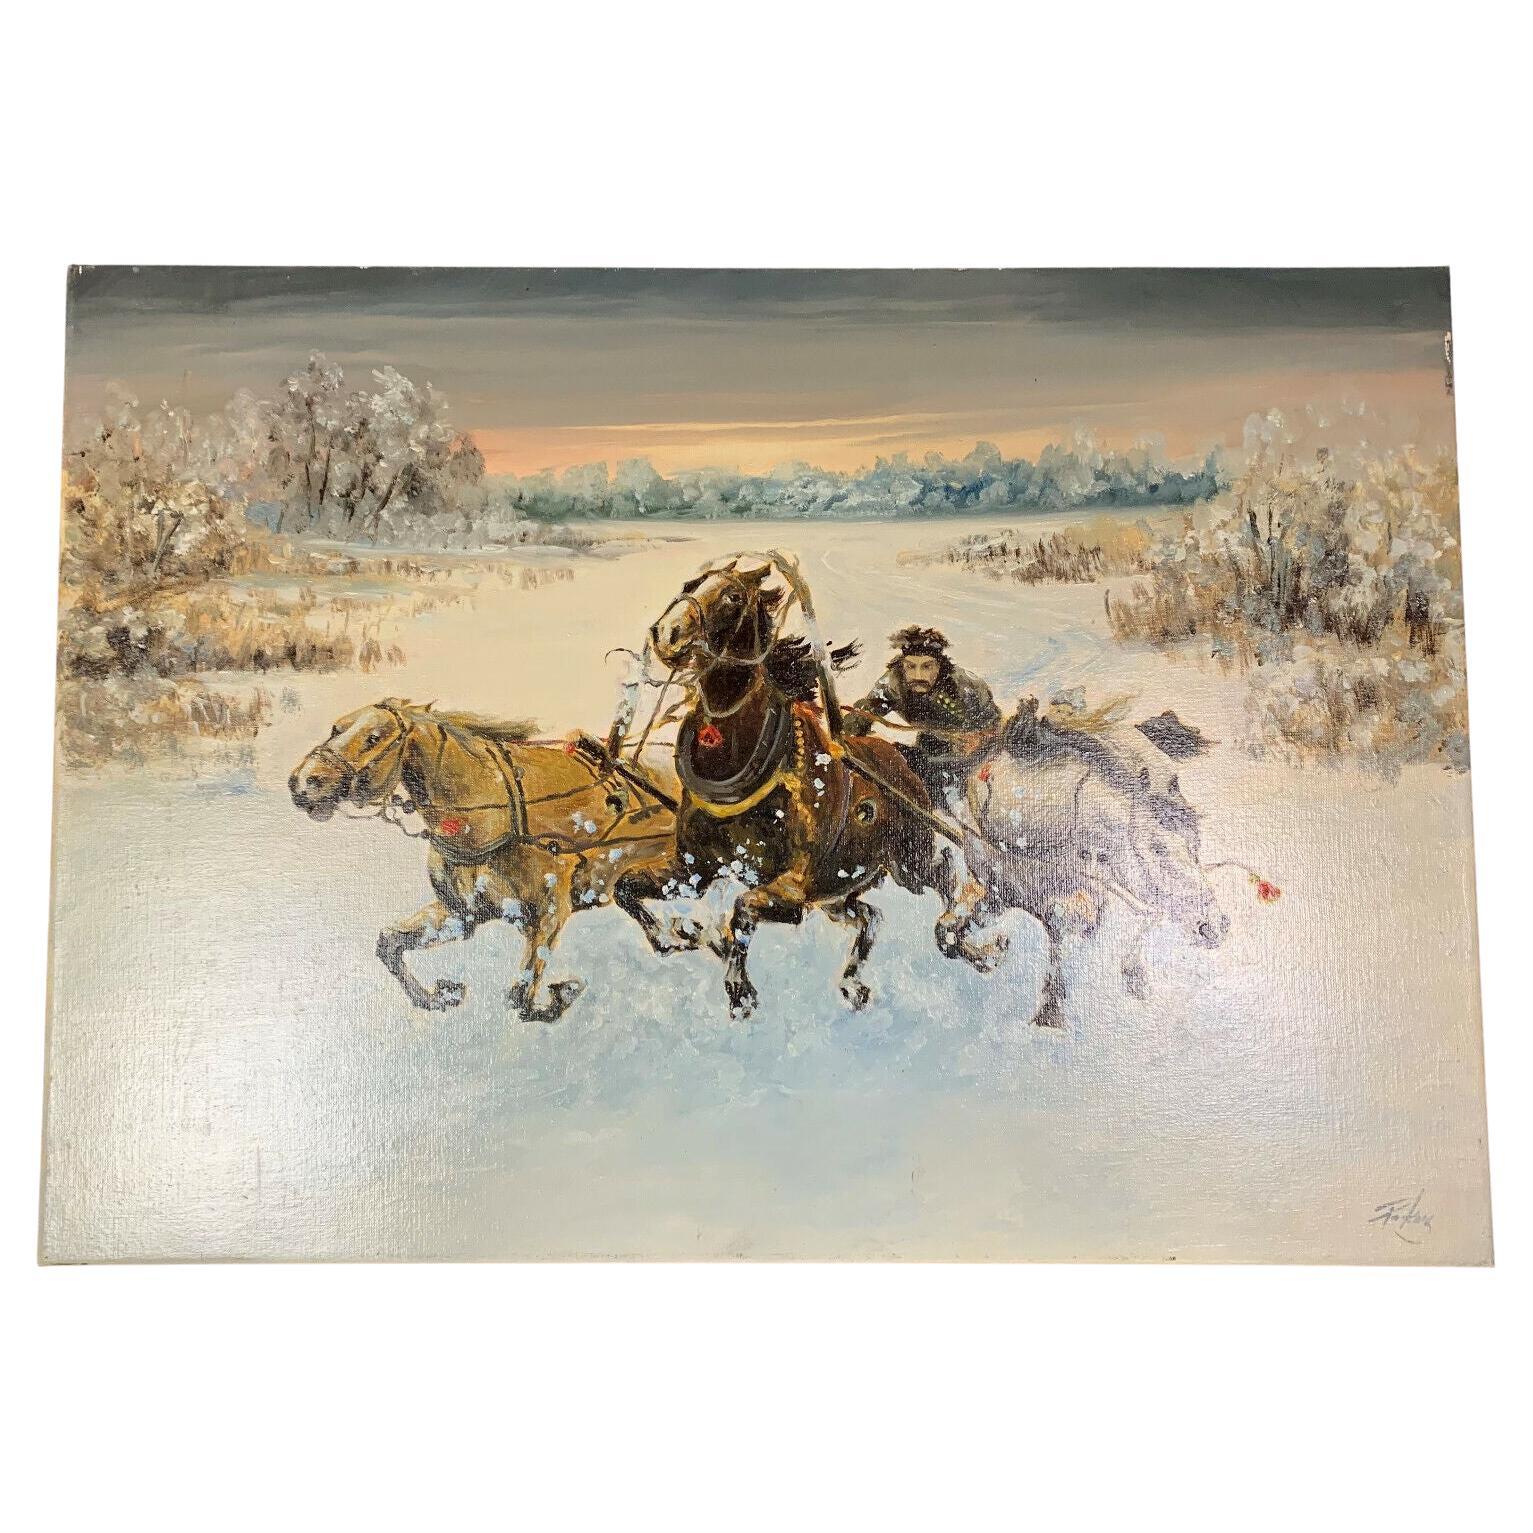 Captivating Russian Artwork from the Late 19th Century: "Winter Ride" -1X10